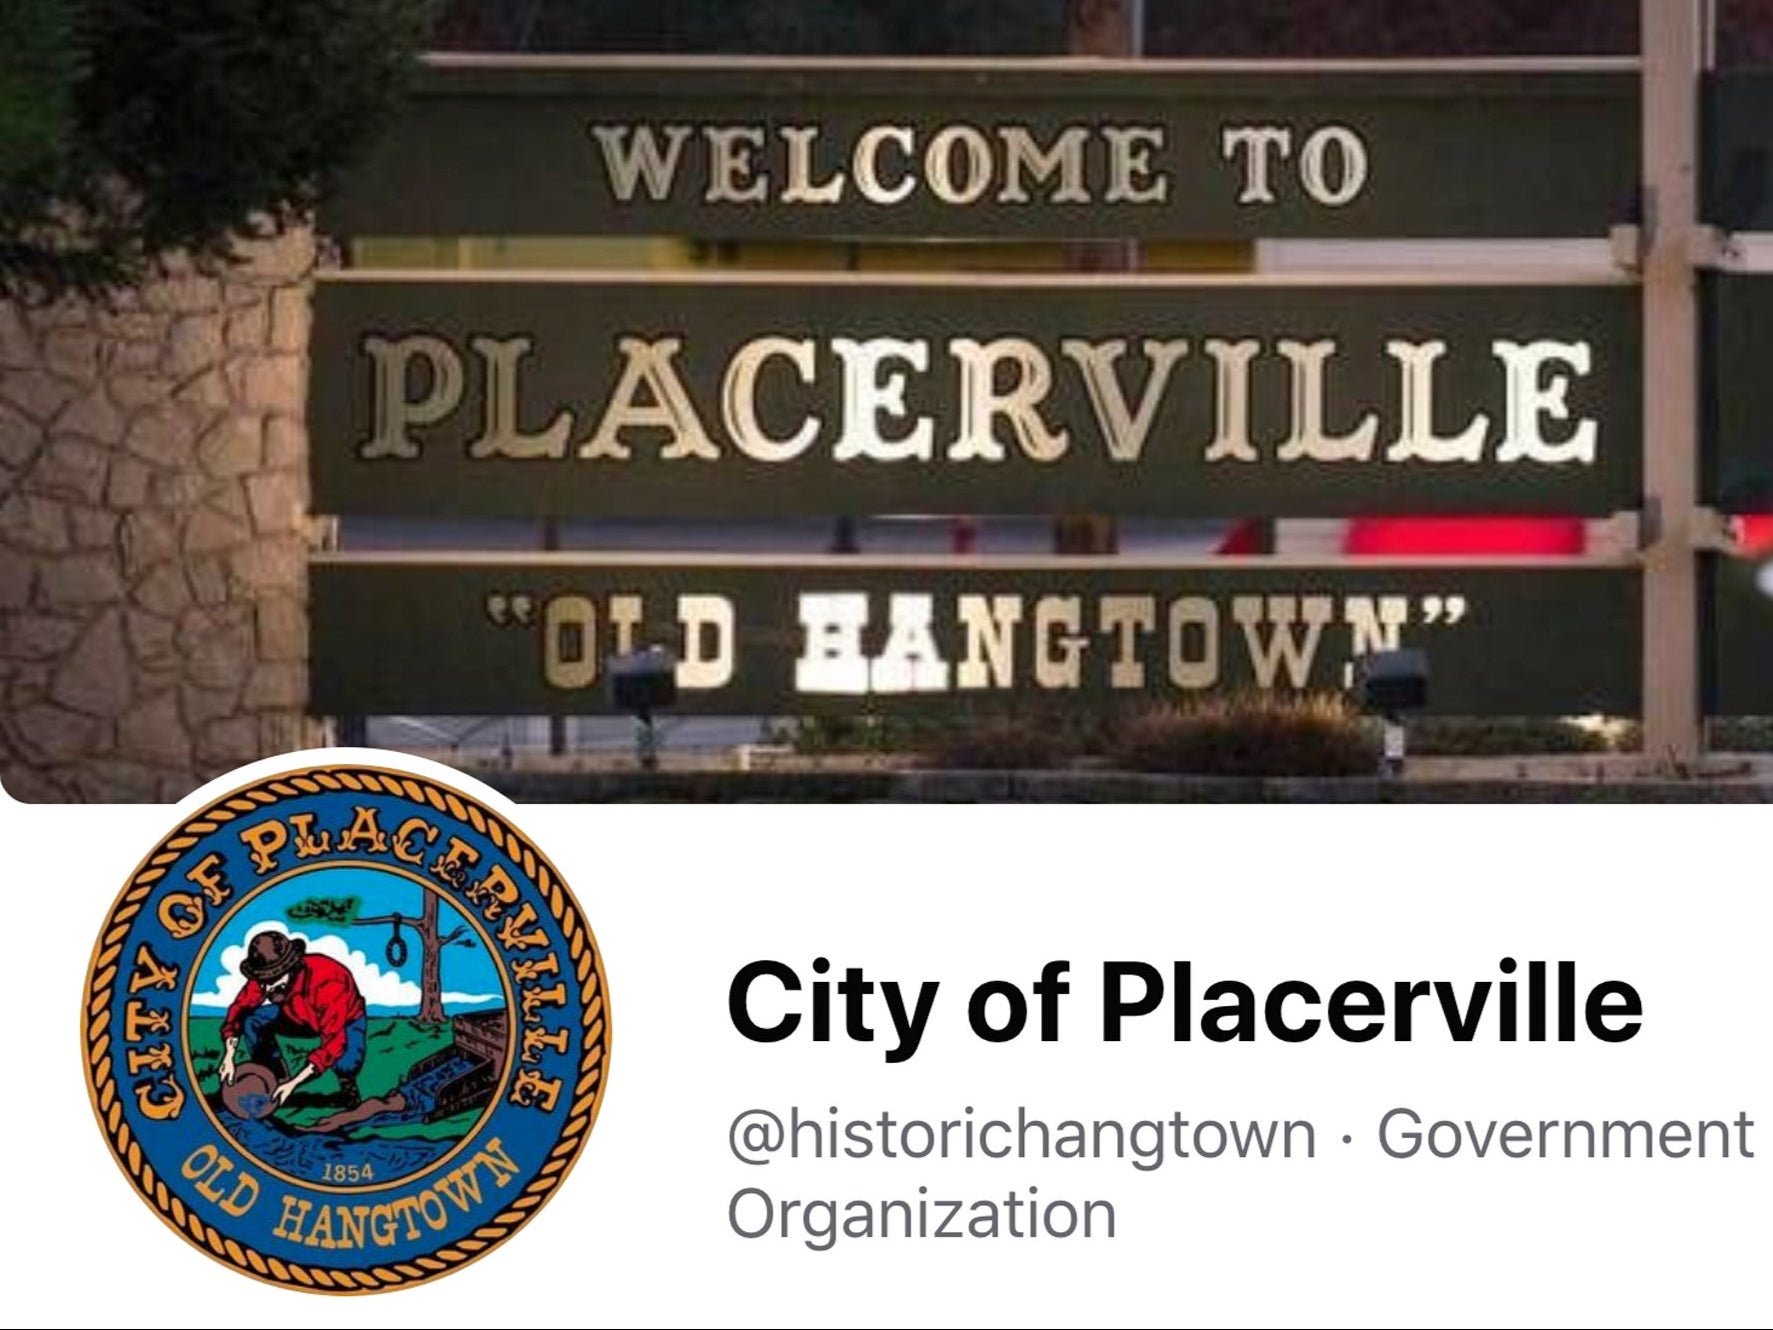 Placervillle’s official Facebook shows the logo featuring a noose